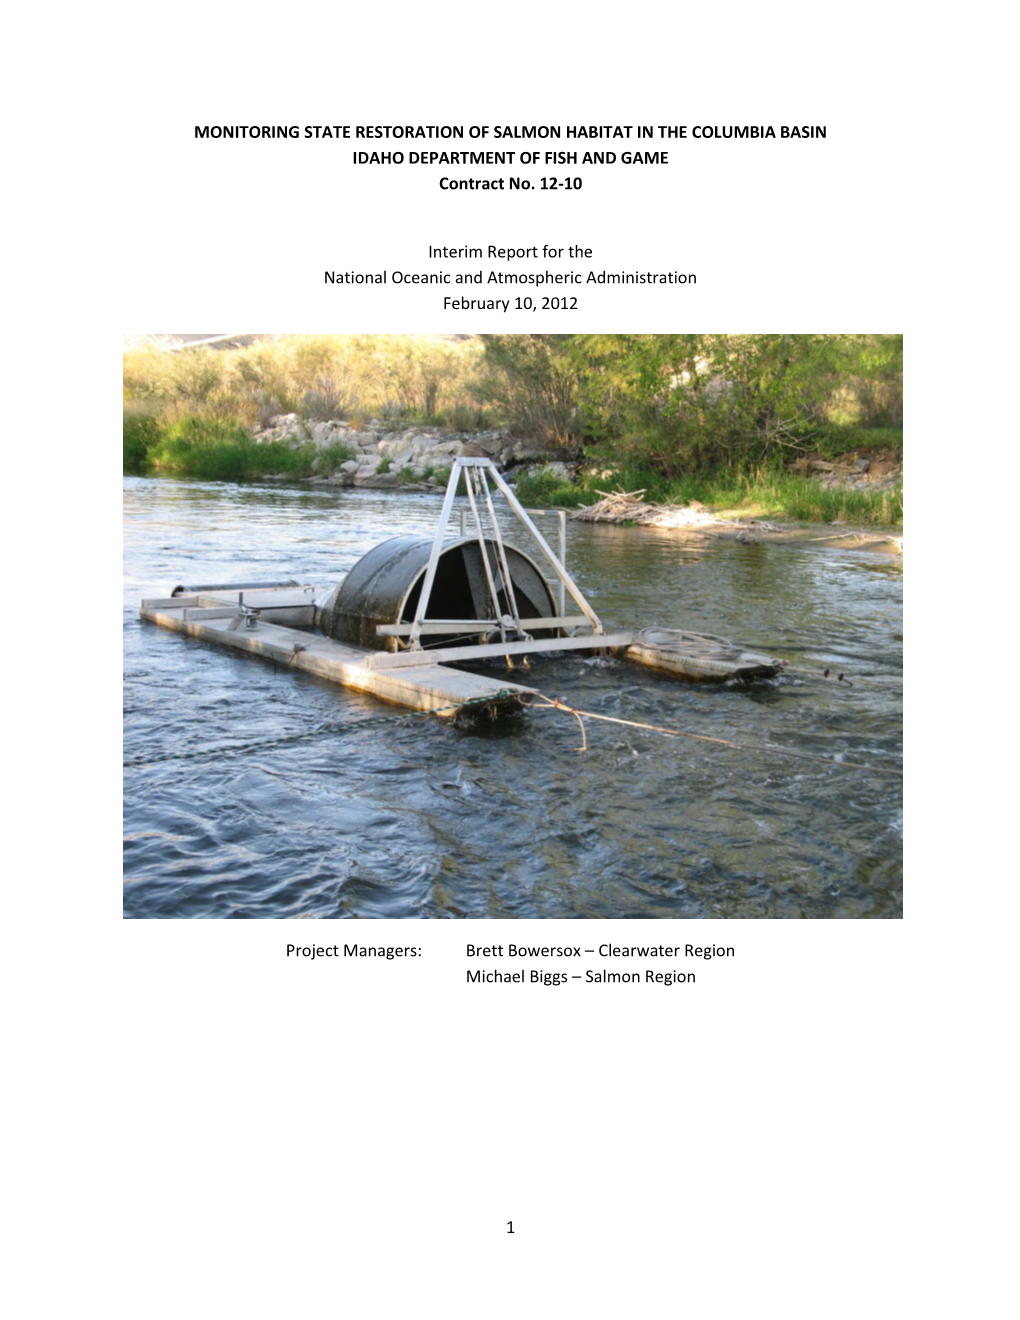 MONITORING STATE RESTORATION of SALMON HABITAT in the COLUMBIA BASIN IDAHO DEPARTMENT of FISH and GAME Contract No